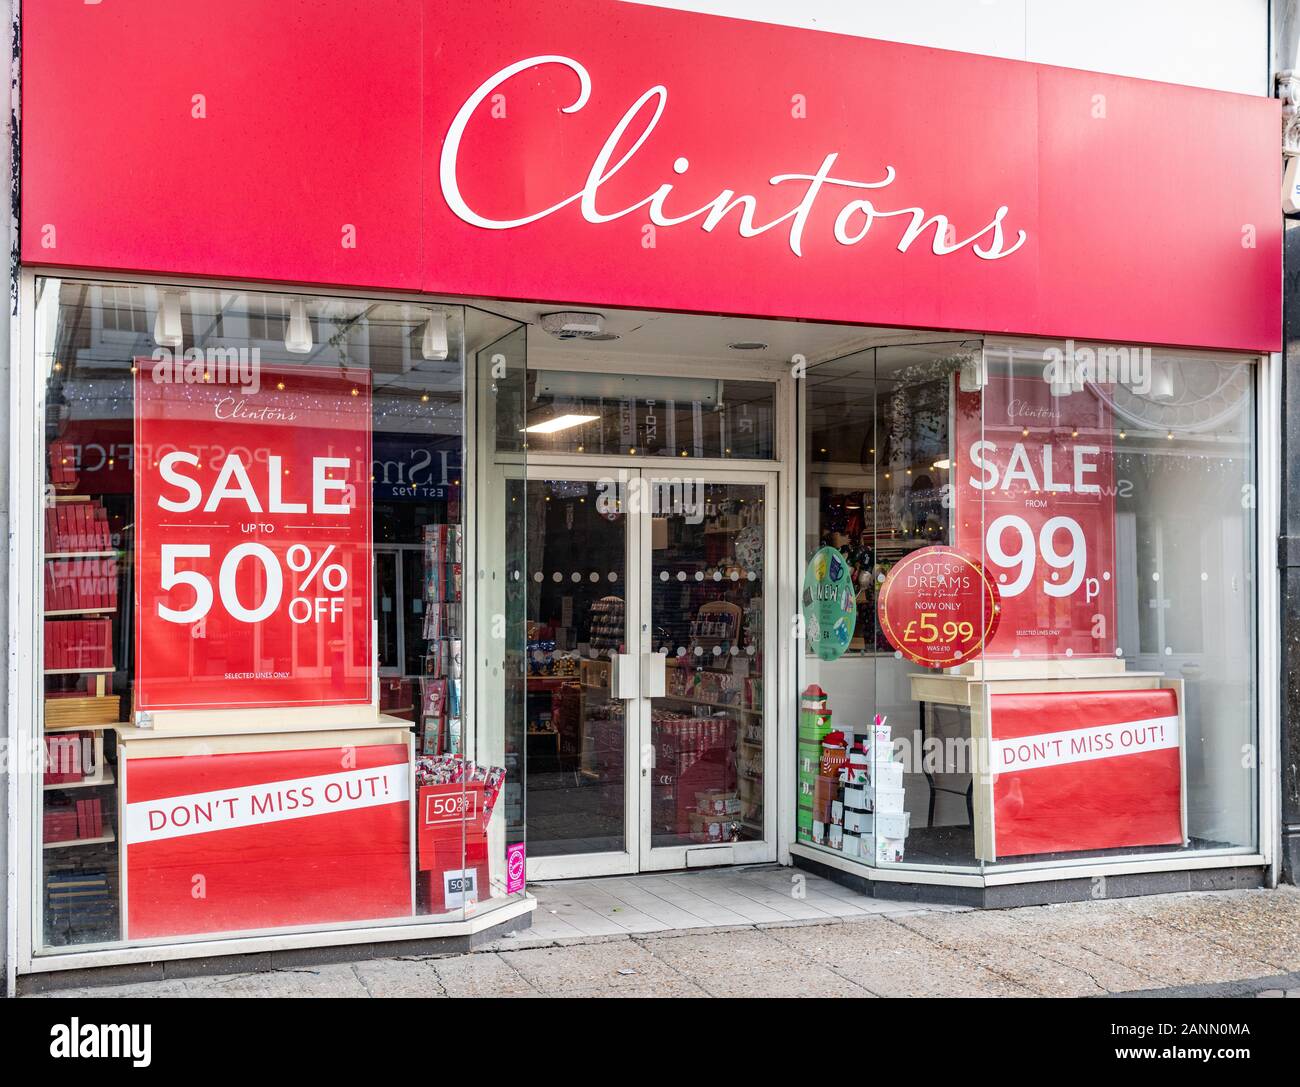 Clintons Cards Winter 2019 / 2020 Sale, Eastbourne, Sussex, England Stock Photo